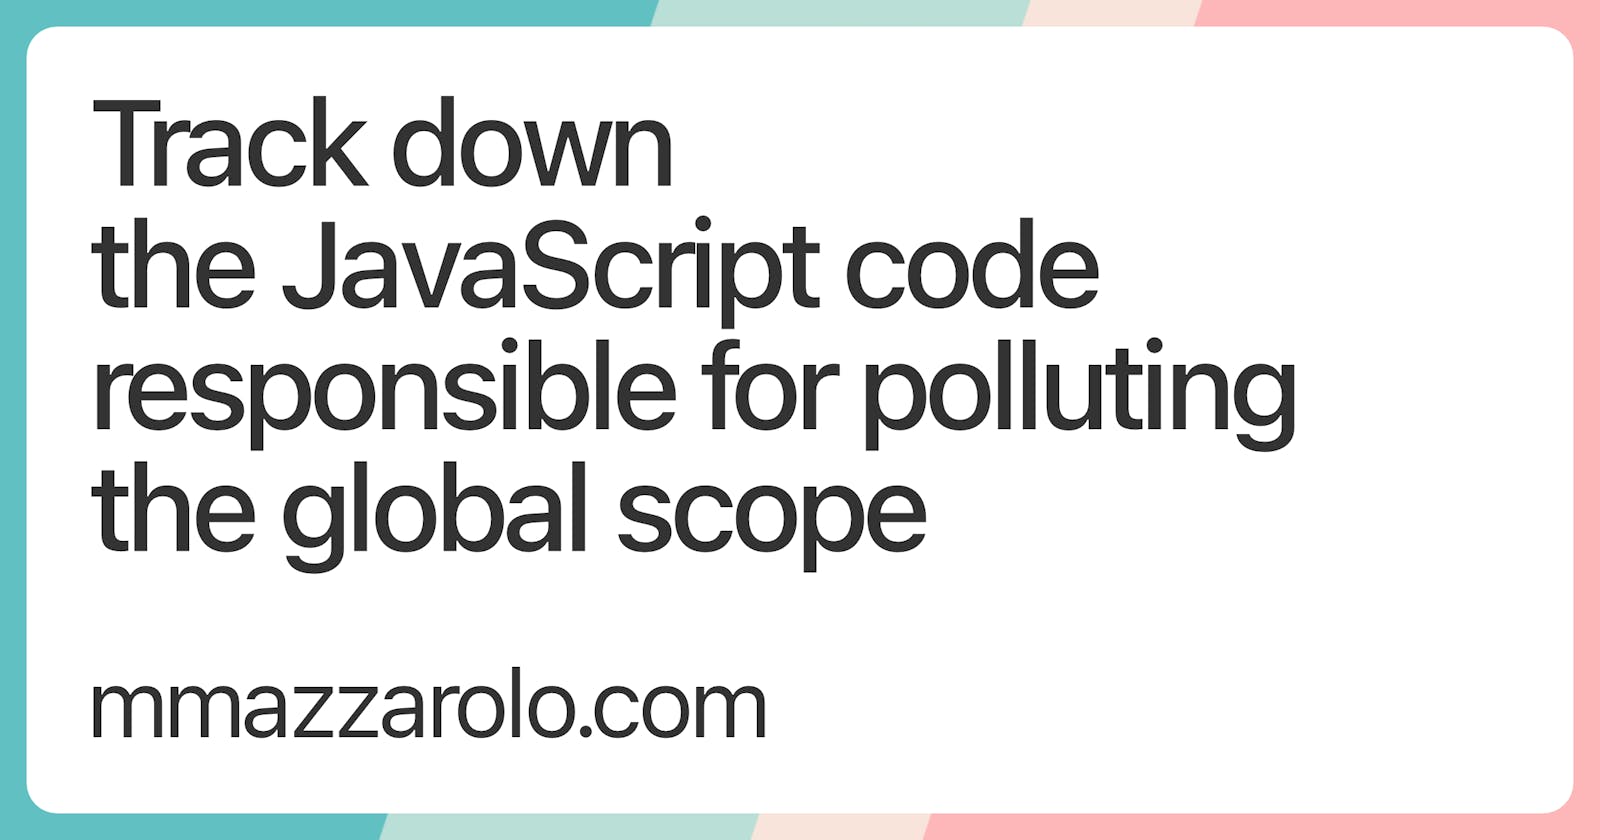 Track down the JavaScript code responsible for polluting the global scope